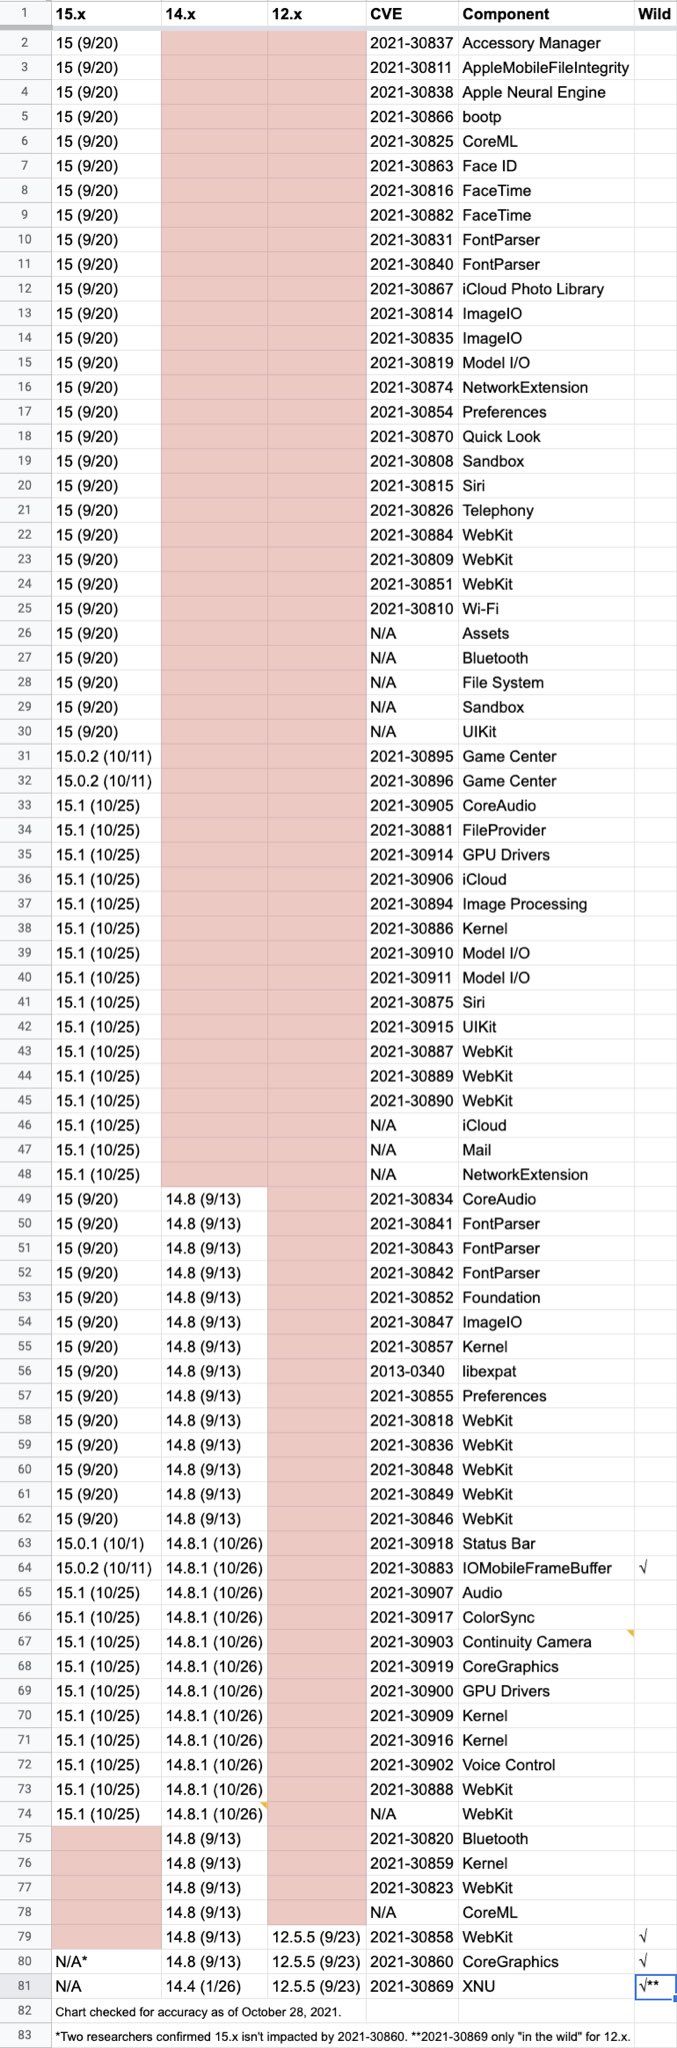 A spreadsheet view of reported vulnerabilities in iOS